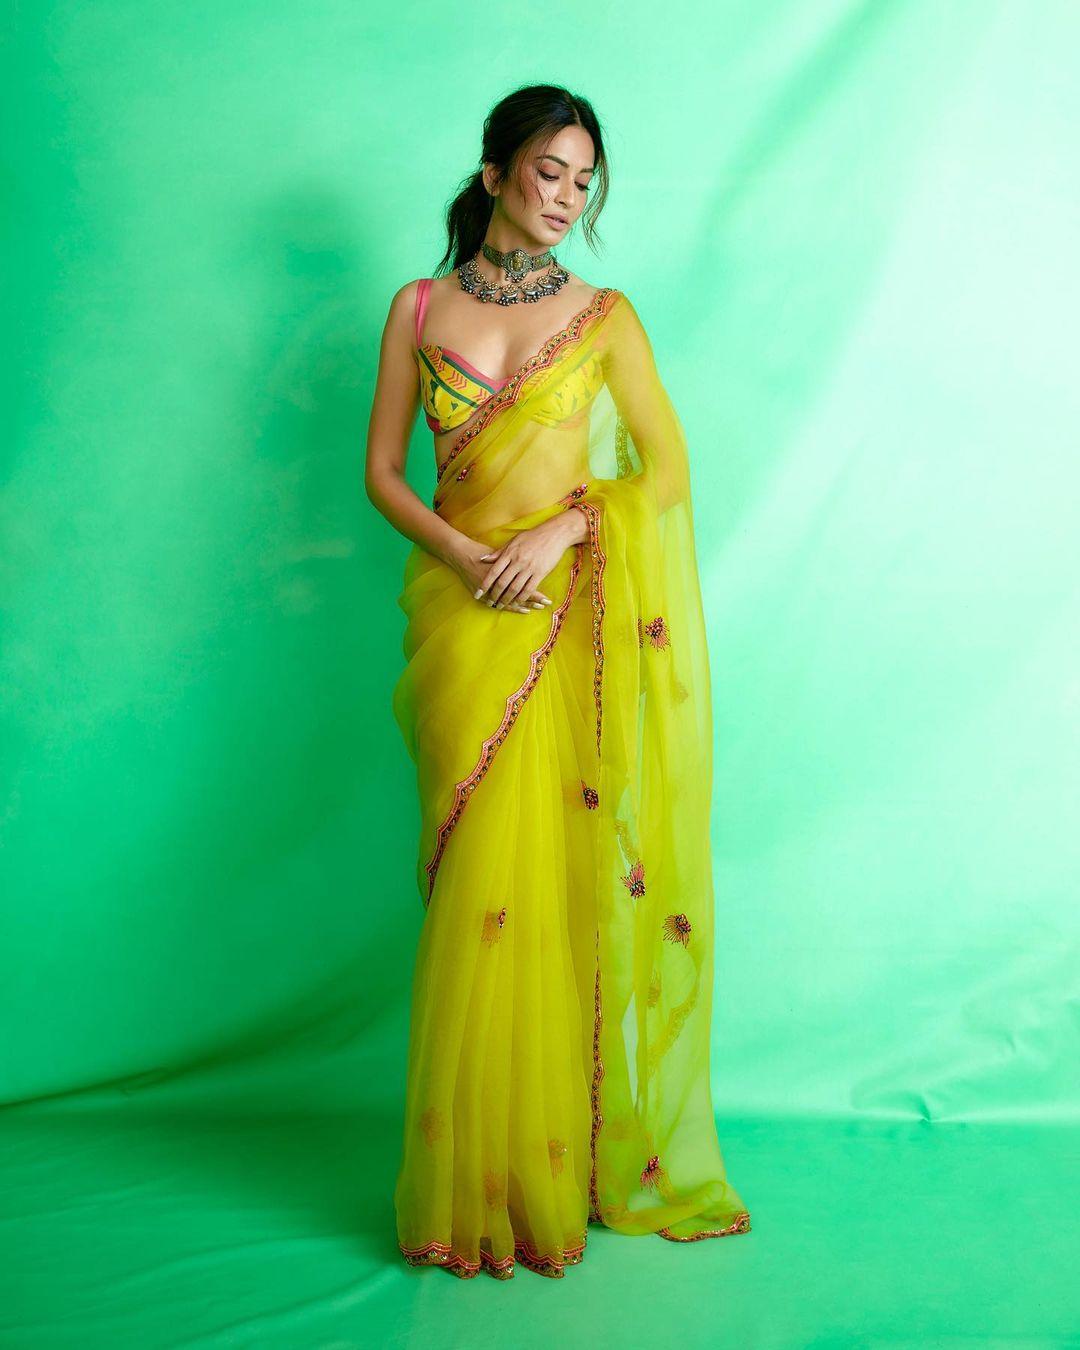 When in doubt, wear a saree. Take cues from Kriti's neon green ensemble to ace your desi avatar